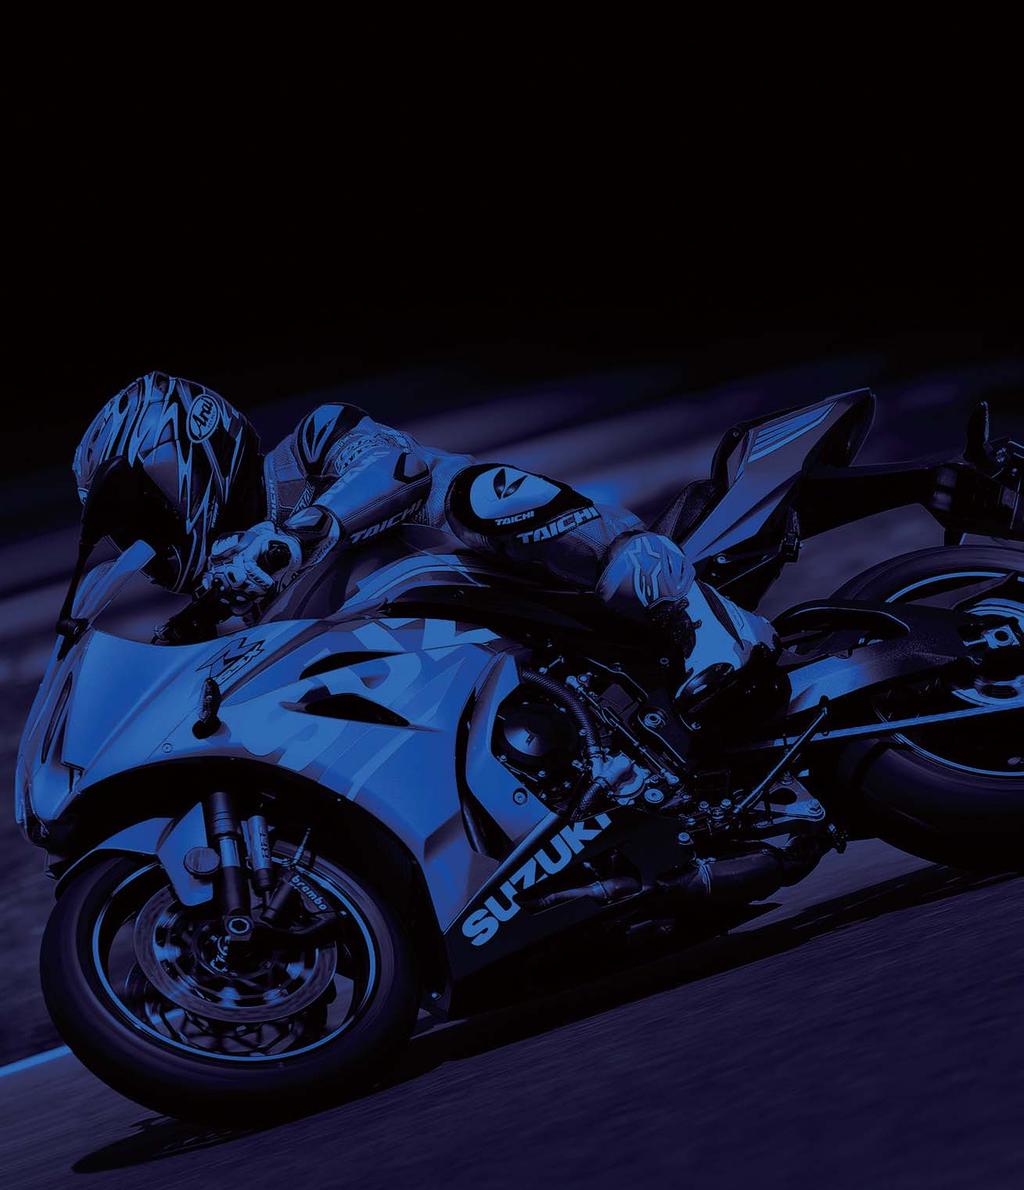 Make the new GSX-R1000 run better, turn better and stop better than any other sportbike.